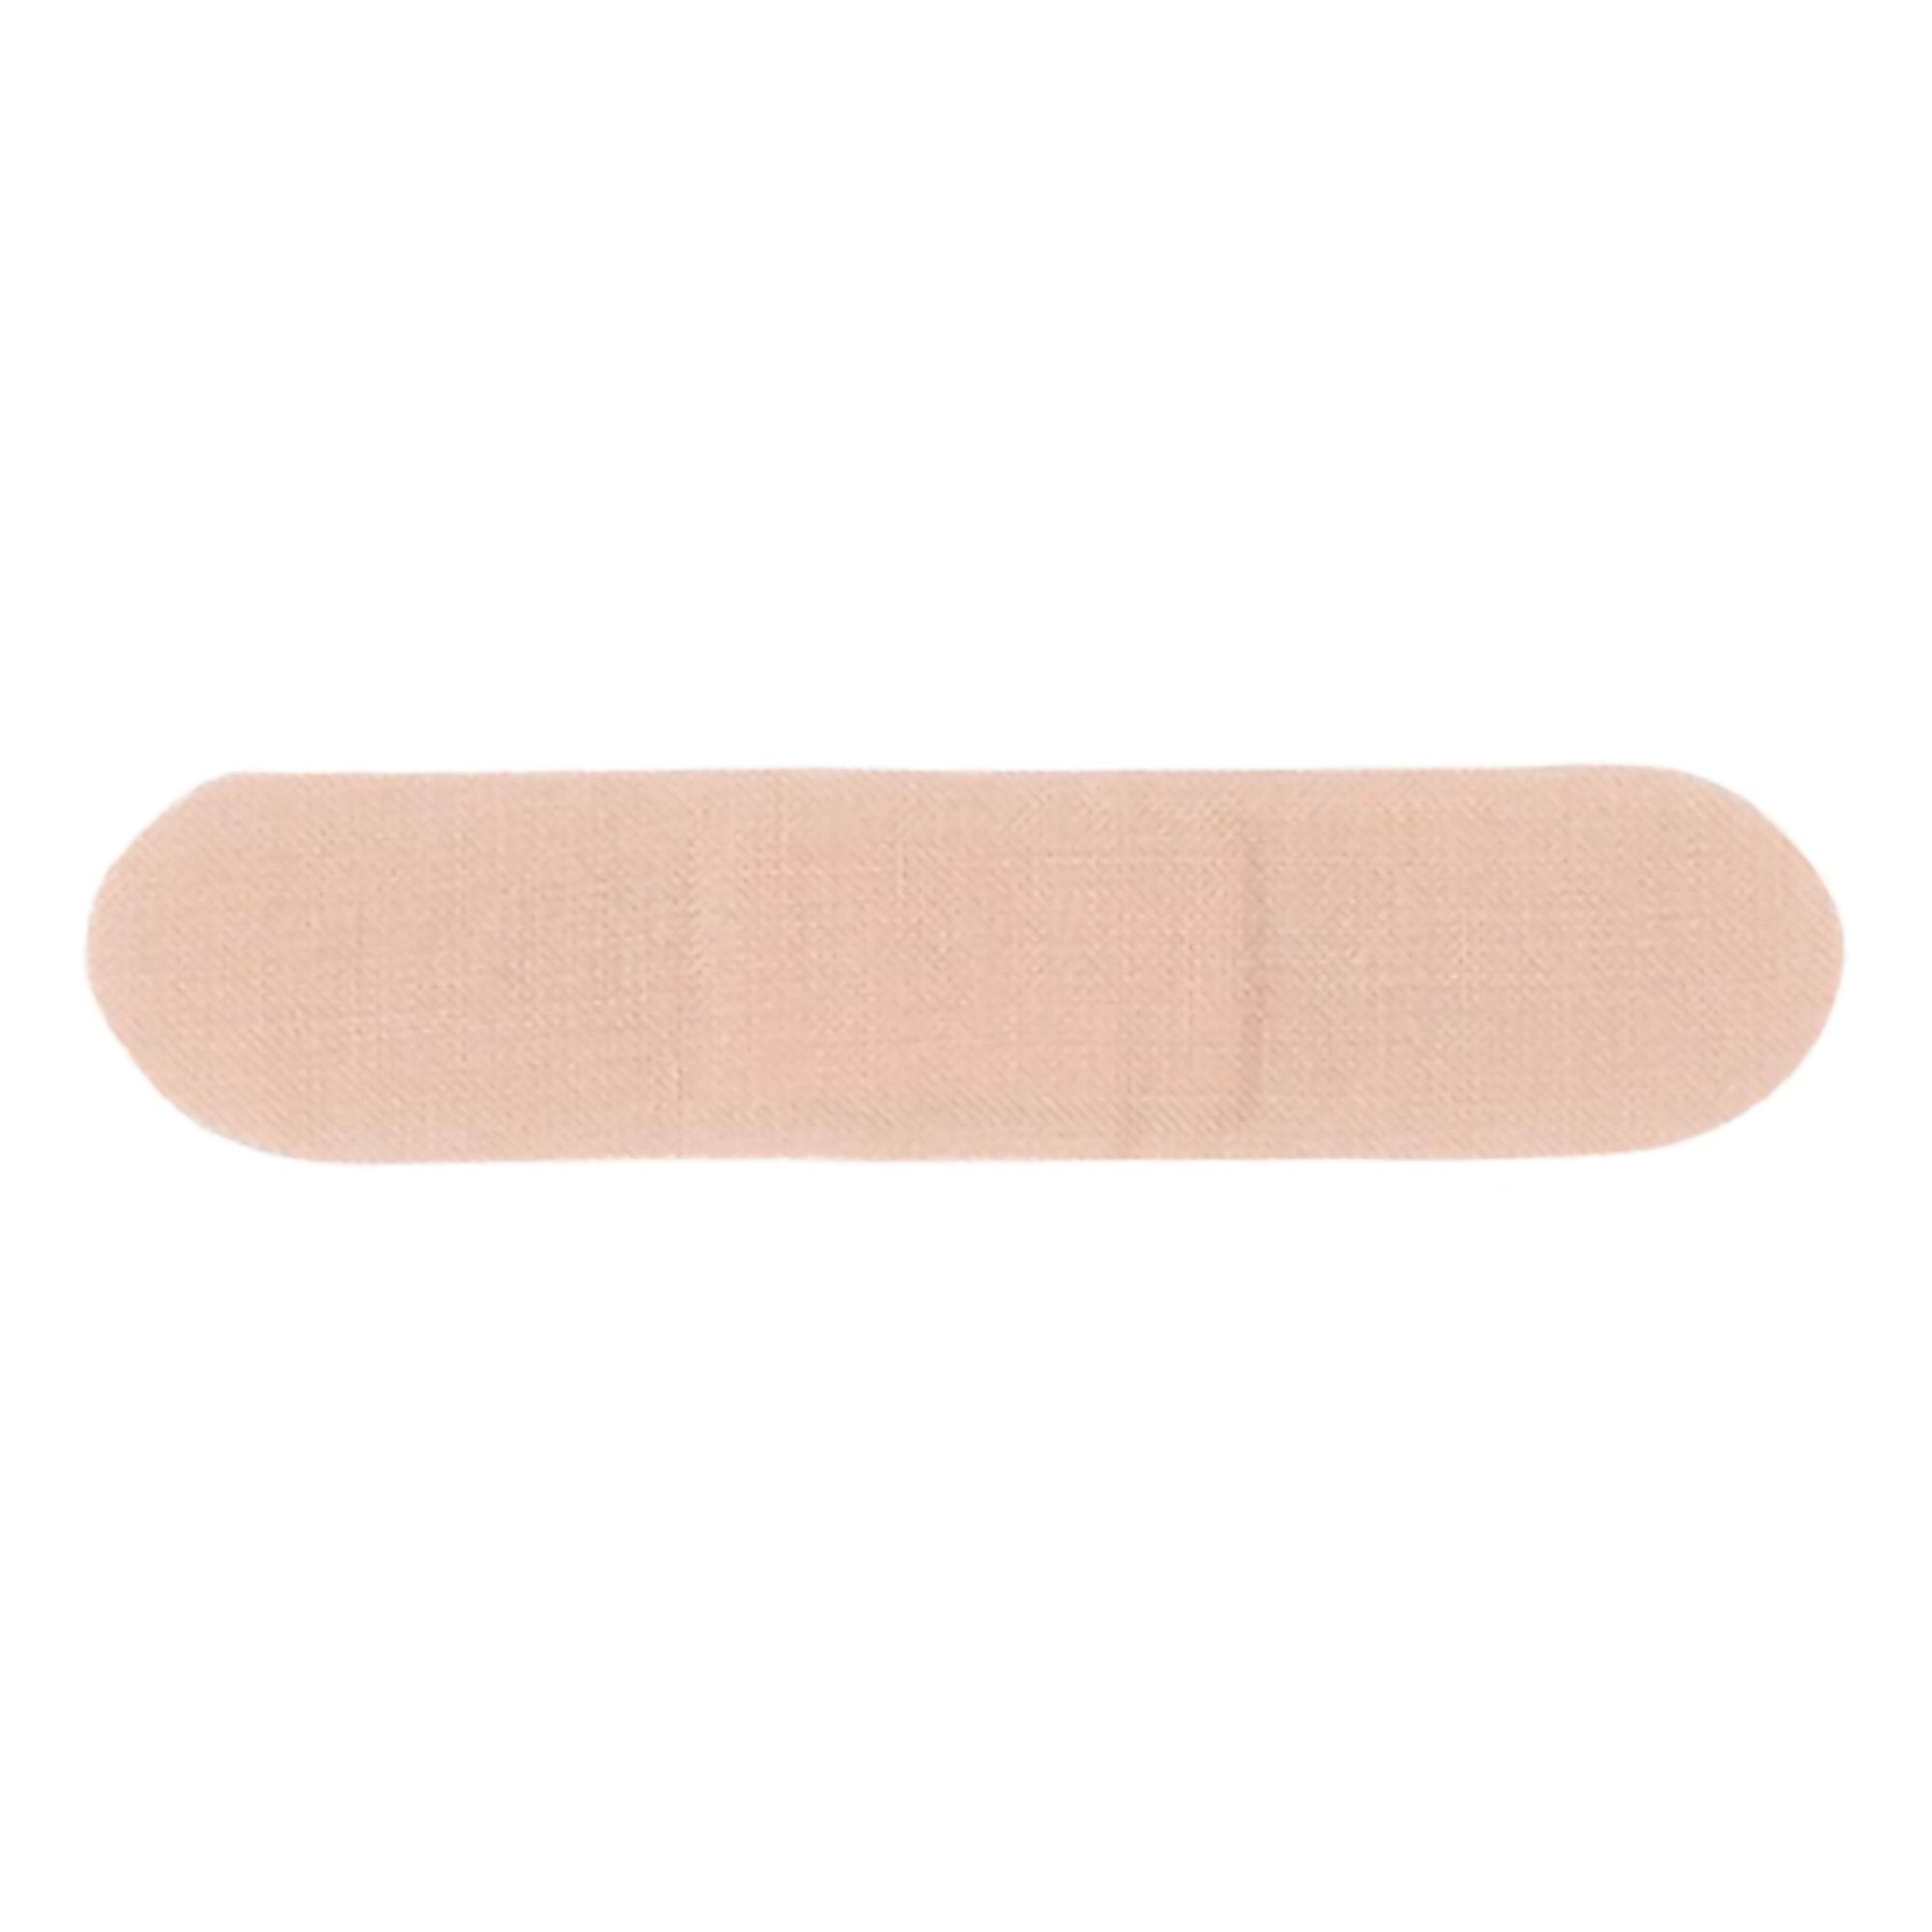 Adhesive Strip Patch™ 3/4 X 3 Inch Bamboo Rectangle Tan Sterile